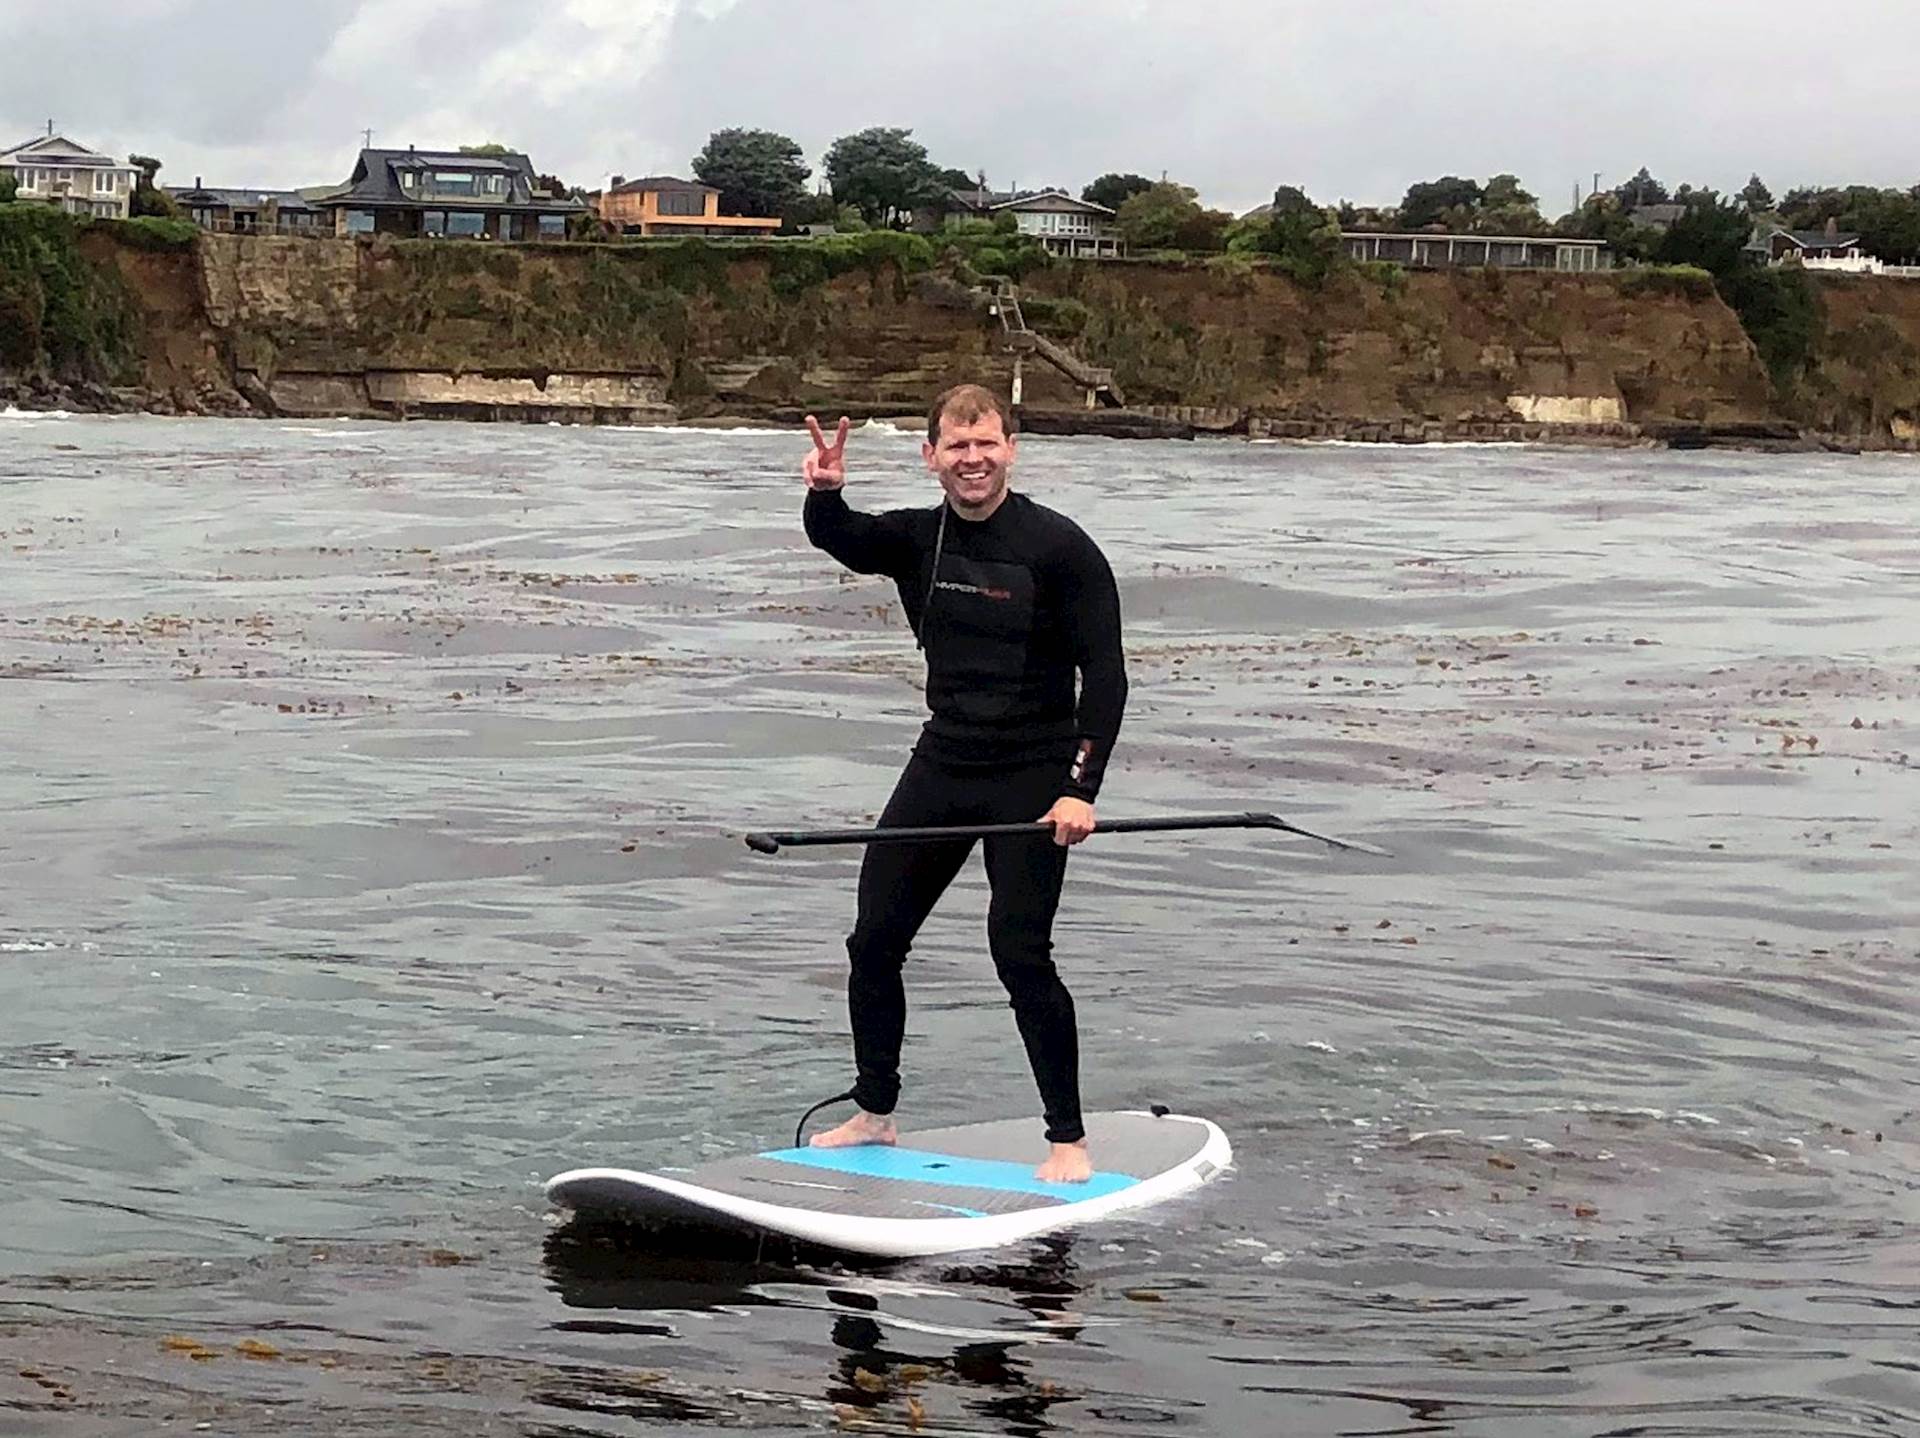 Matt Willey, wearing a wetsuit, gives a “peace” hand sign and stands on a paddleboard in the waters of Monterey Bay while hol